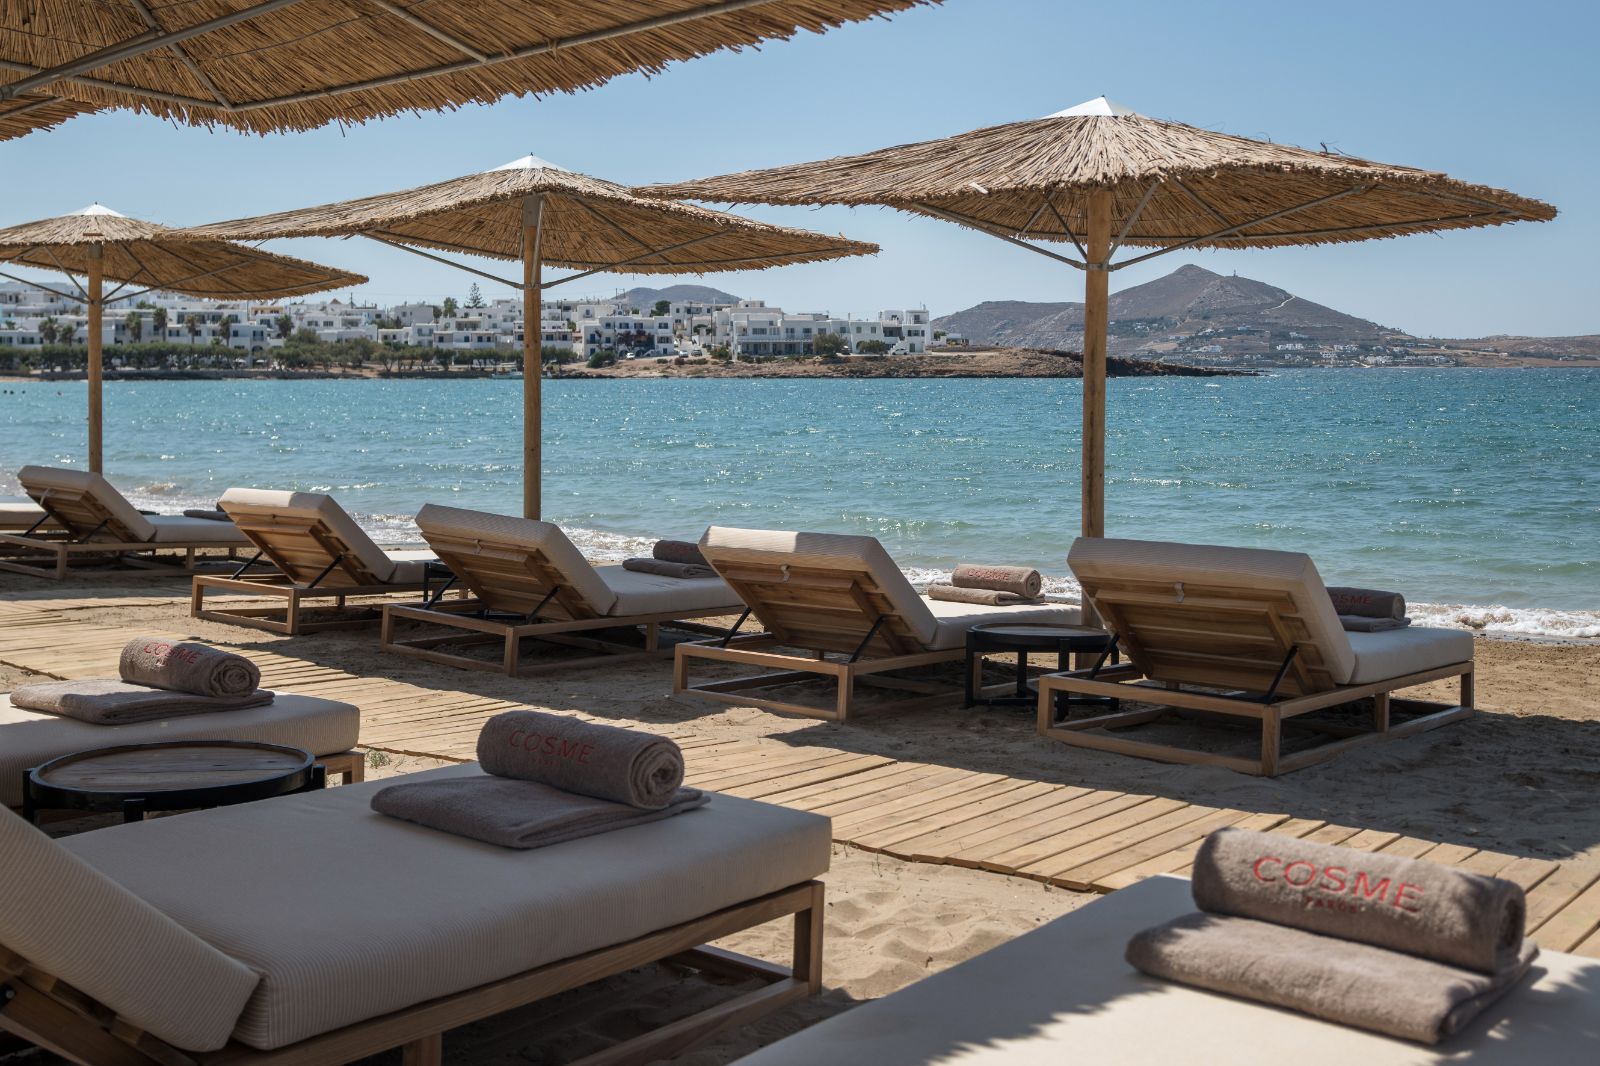 Sun loungers on the private beach at the Cosme Resort in Paros Greece